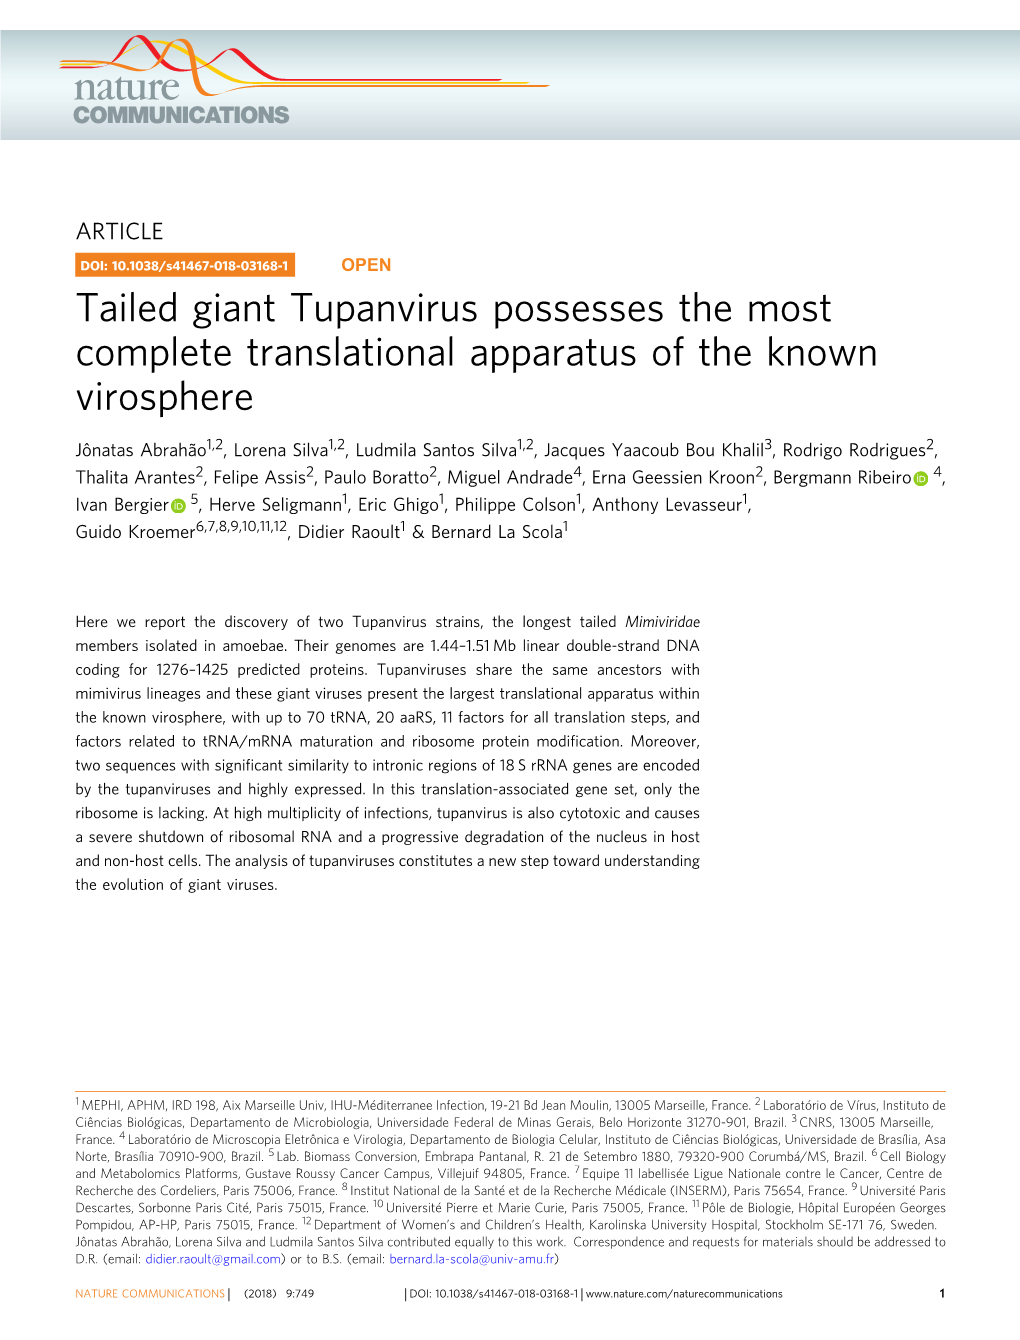 Tailed Giant Tupanvirus Possesses the Most Complete Translational Apparatus of the Known Virosphere